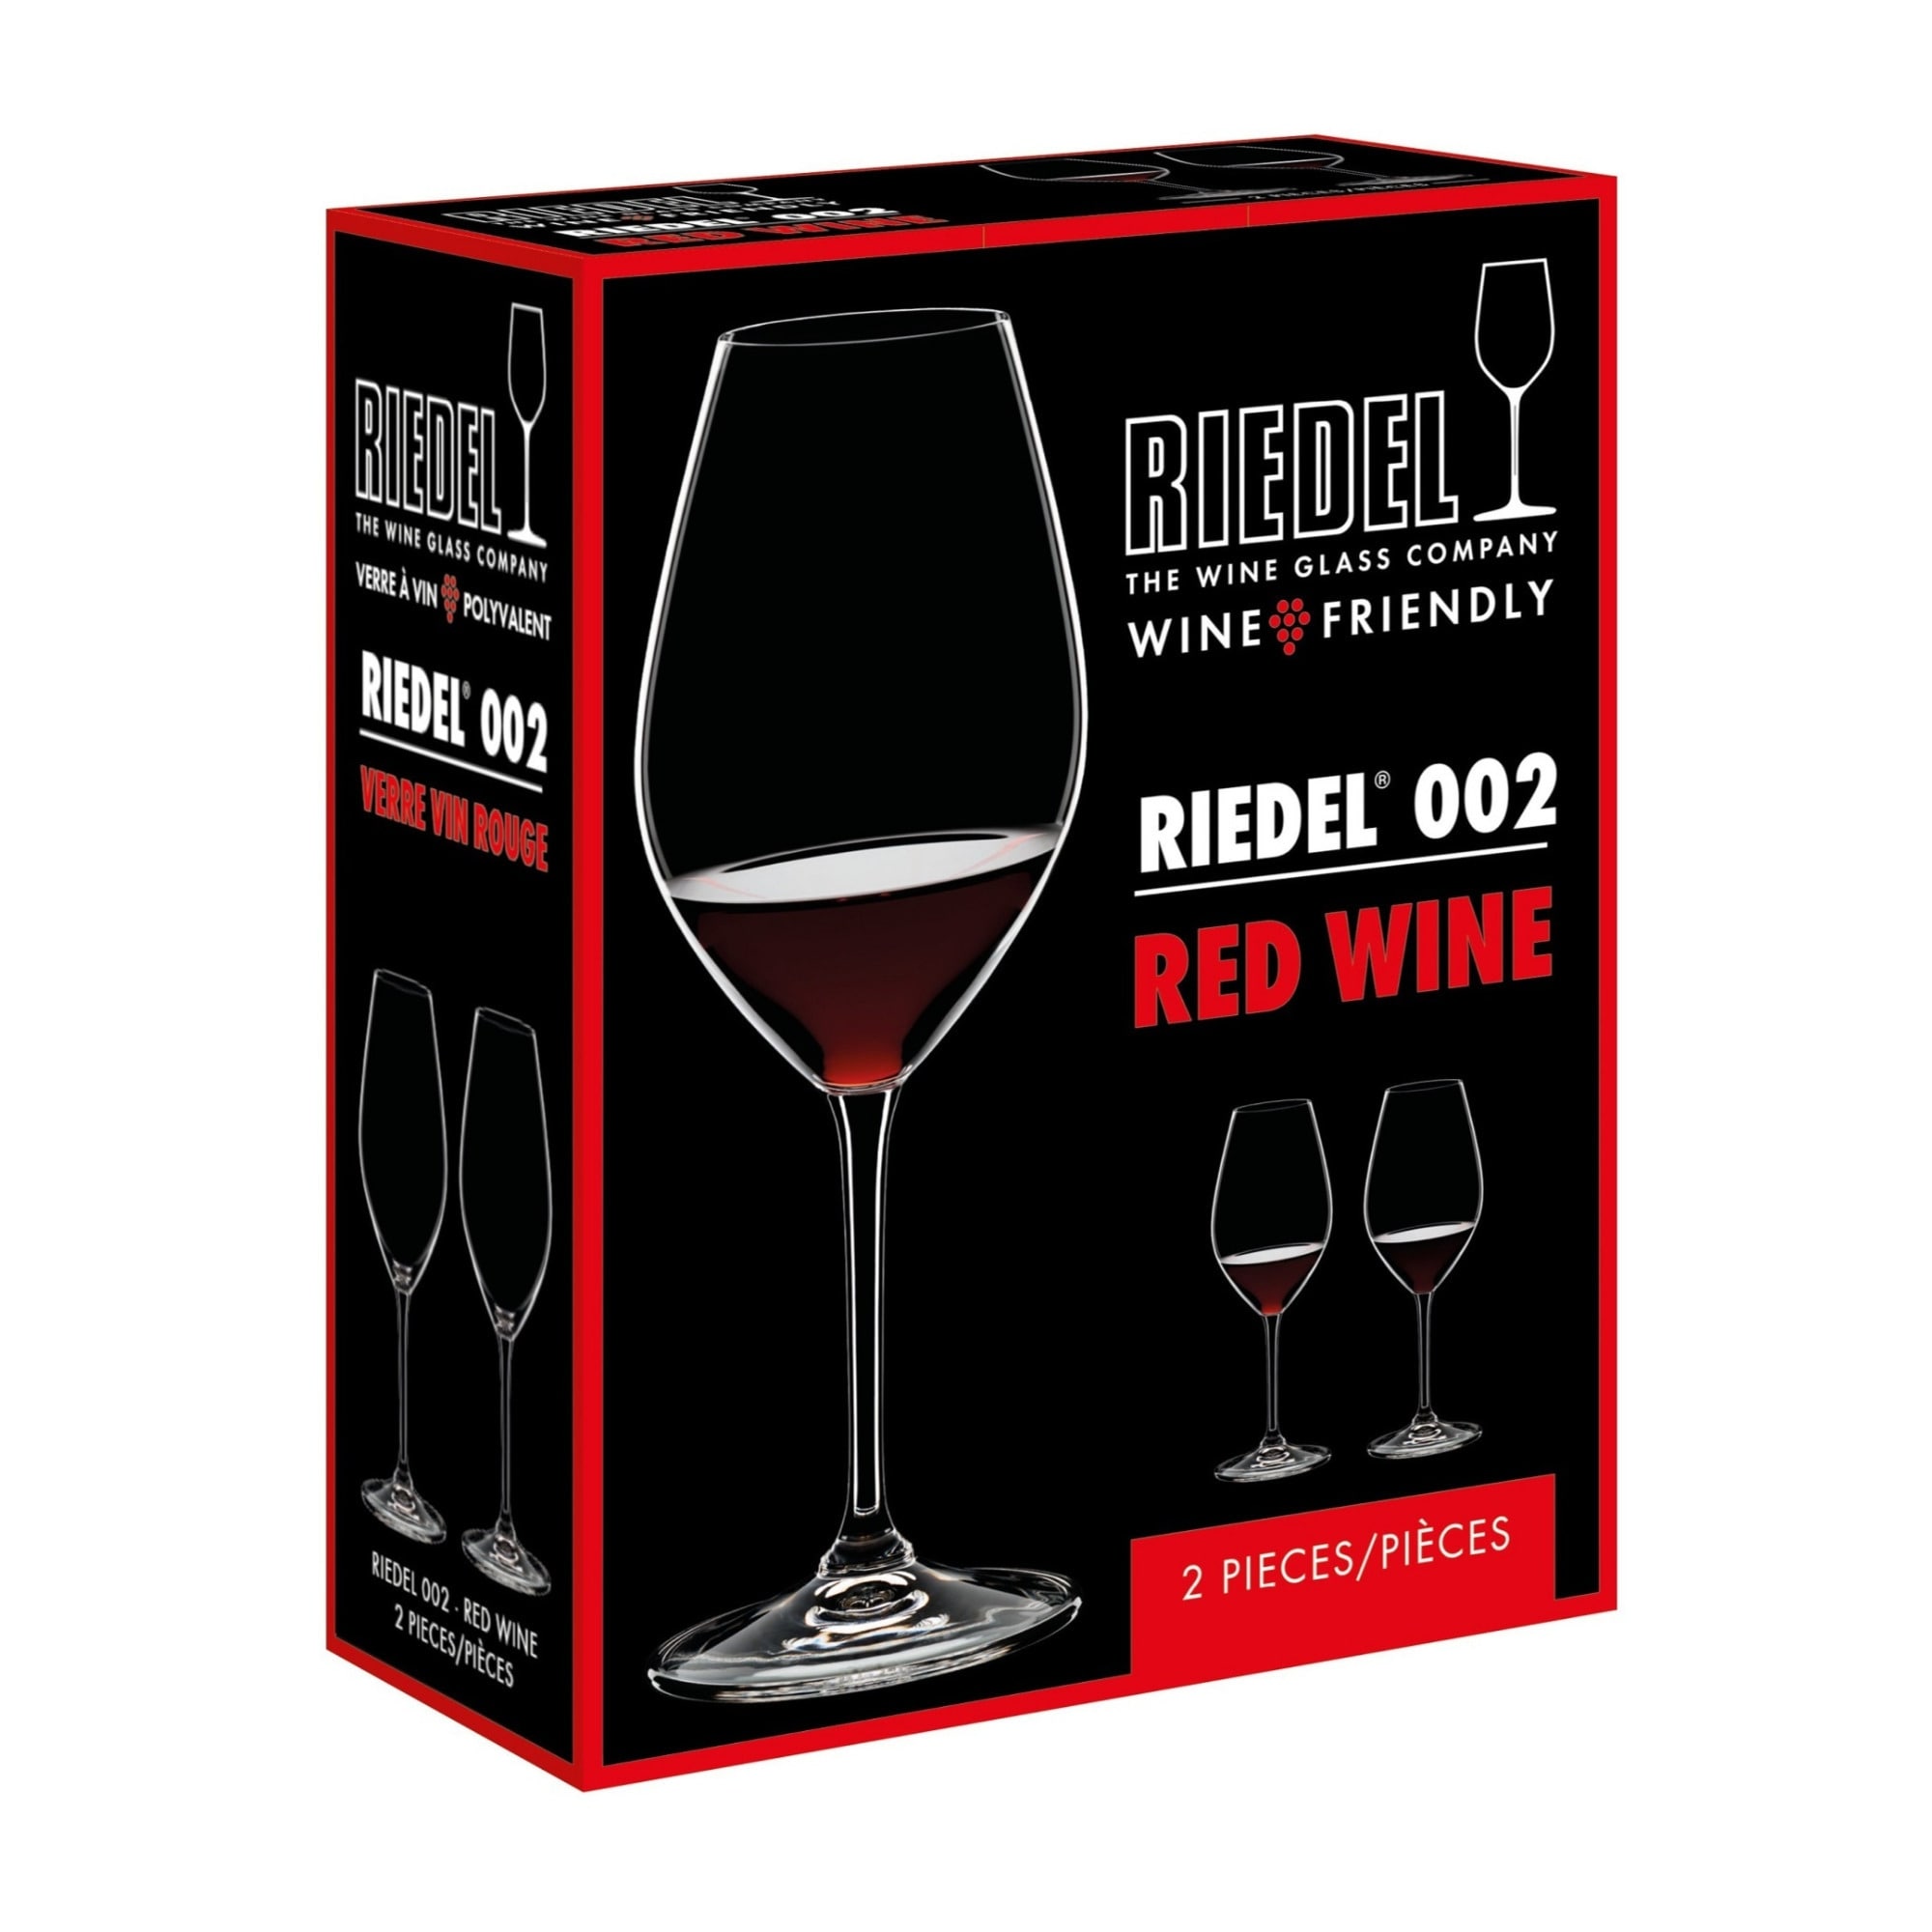 https://ak1.ostkcdn.com/images/products/is/images/direct/22c68b9655c367361c39af9c4c9a561b8fa08599/Riedel-002-Red-Wine-Glass-Set-%282-Pack%29.jpg